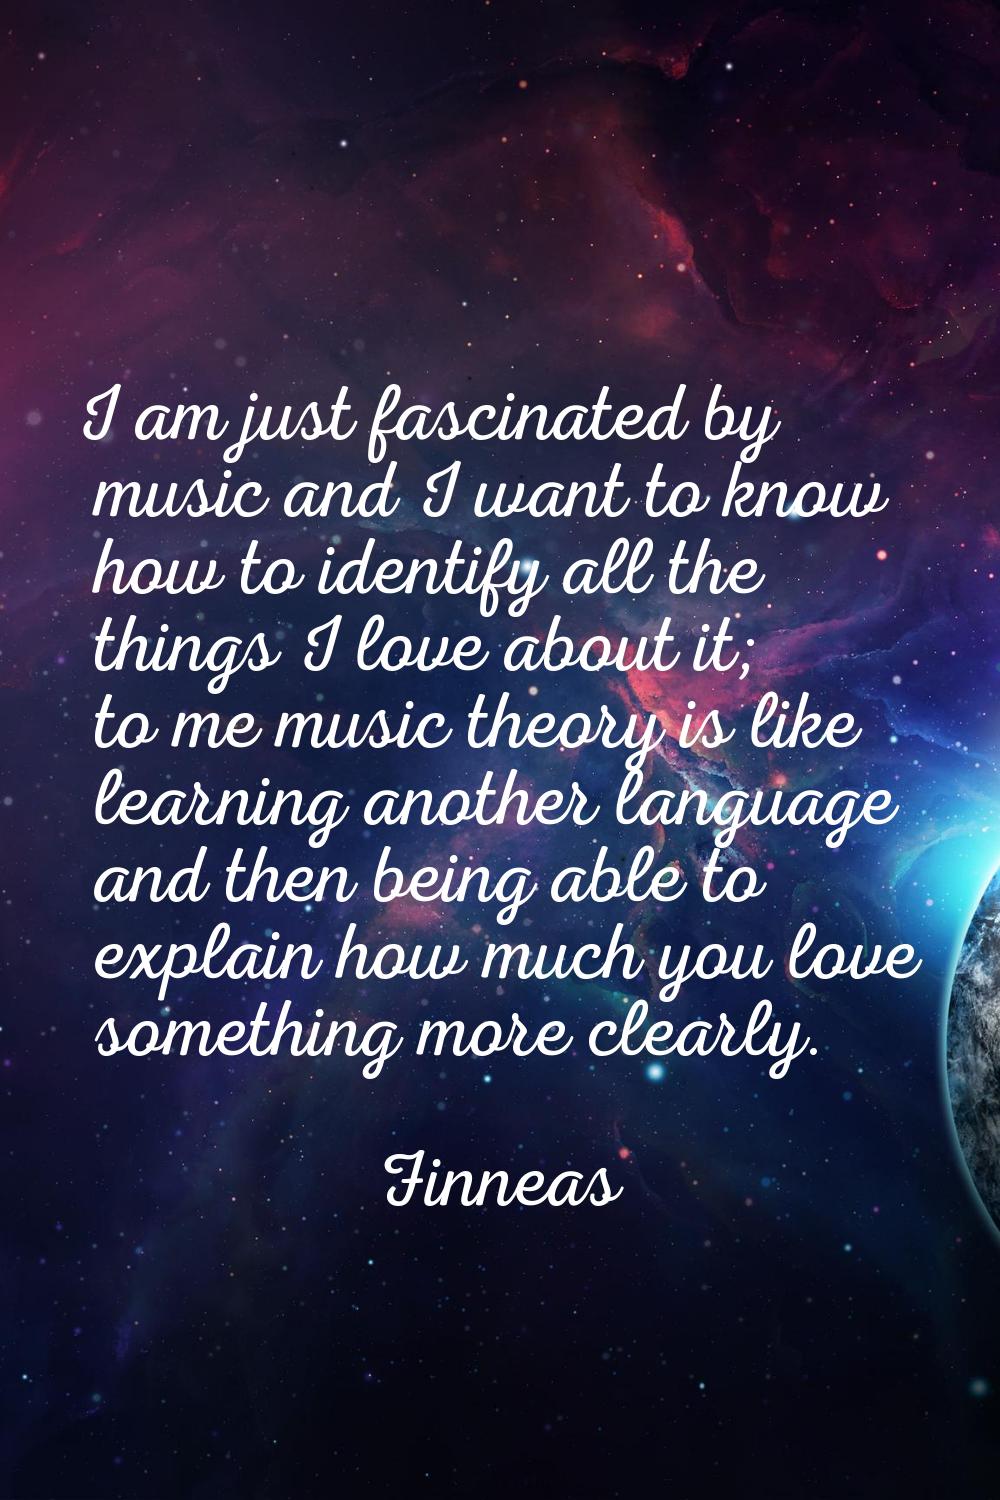 I am just fascinated by music and I want to know how to identify all the things I love about it; to